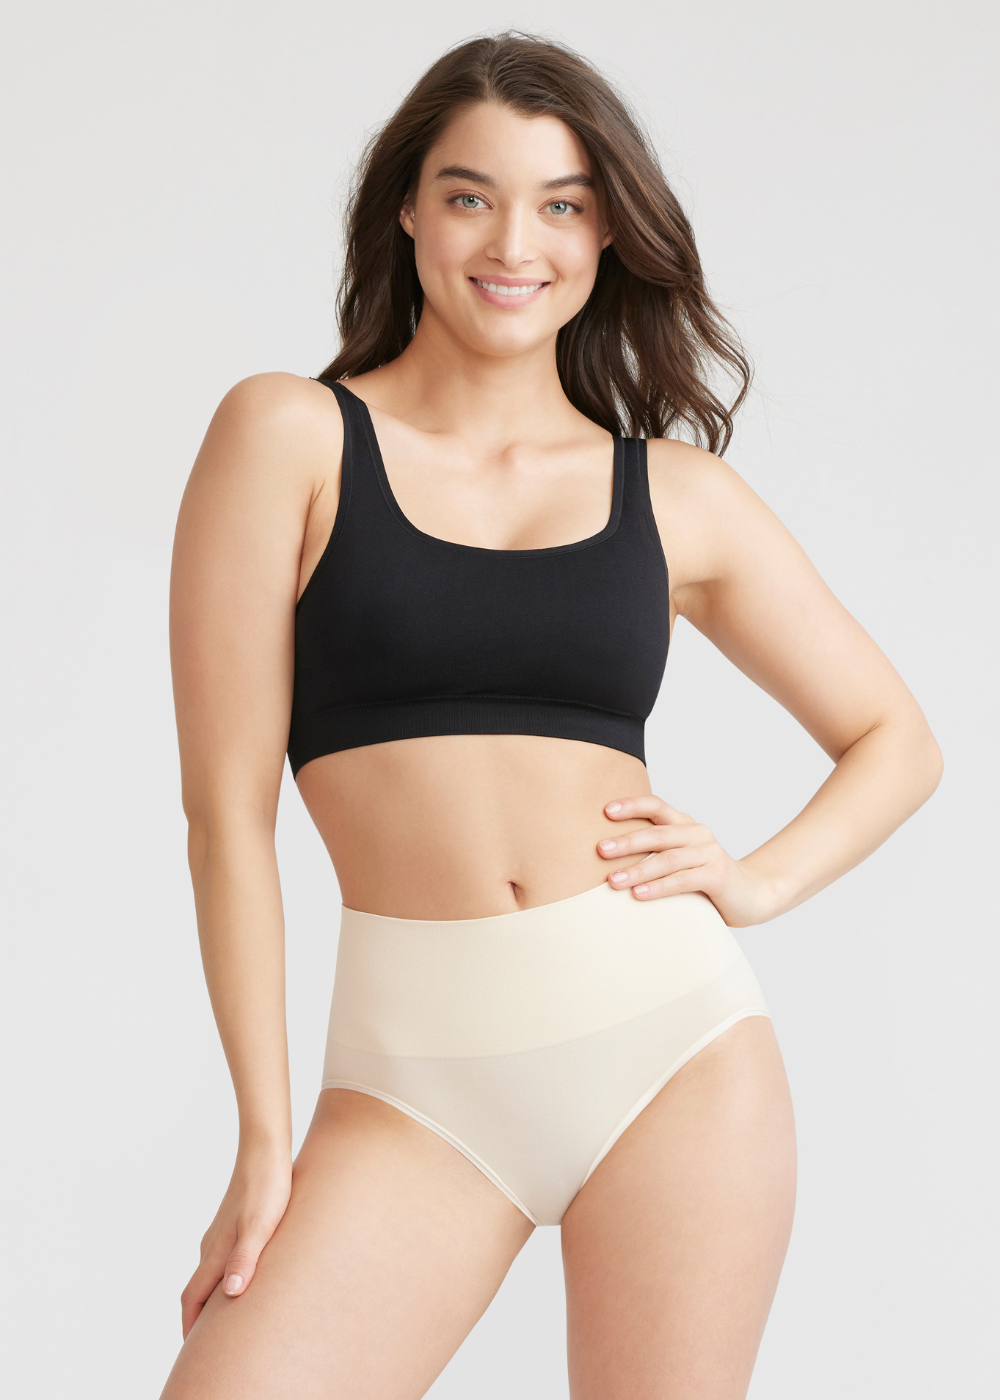 Breezies Seamless Shaping Briefs Tummy Control Shaper - Set of 2